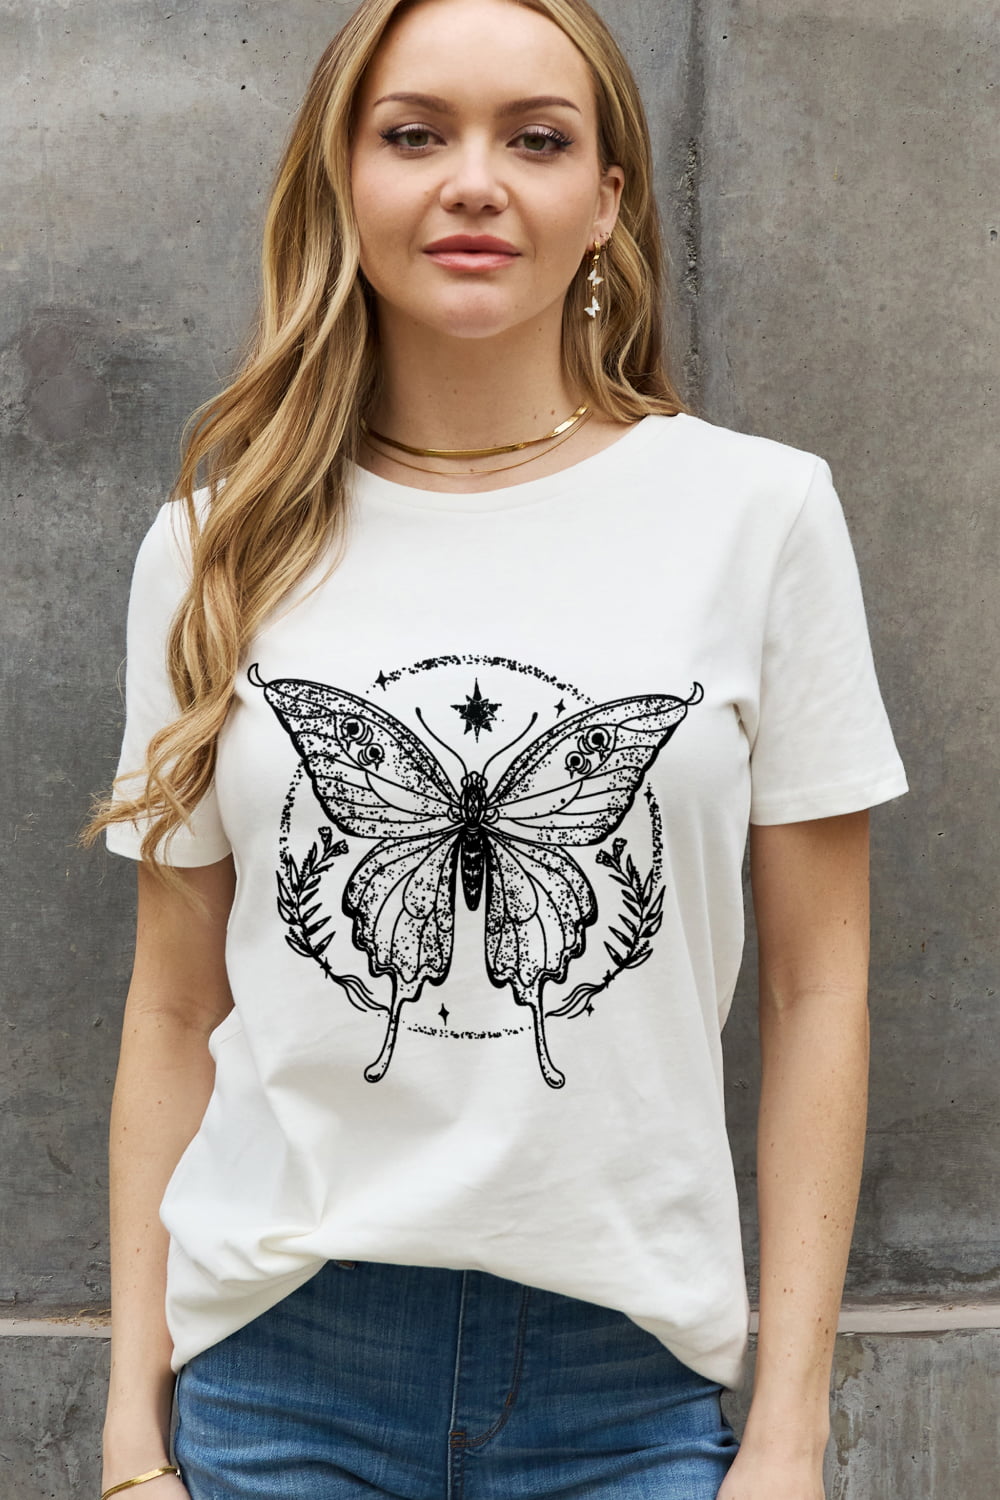 Slate Gray Simply Love Full Size Butterfly Graphic Cotton Tee Sentient Beauty Fashions Apparel & Accessories